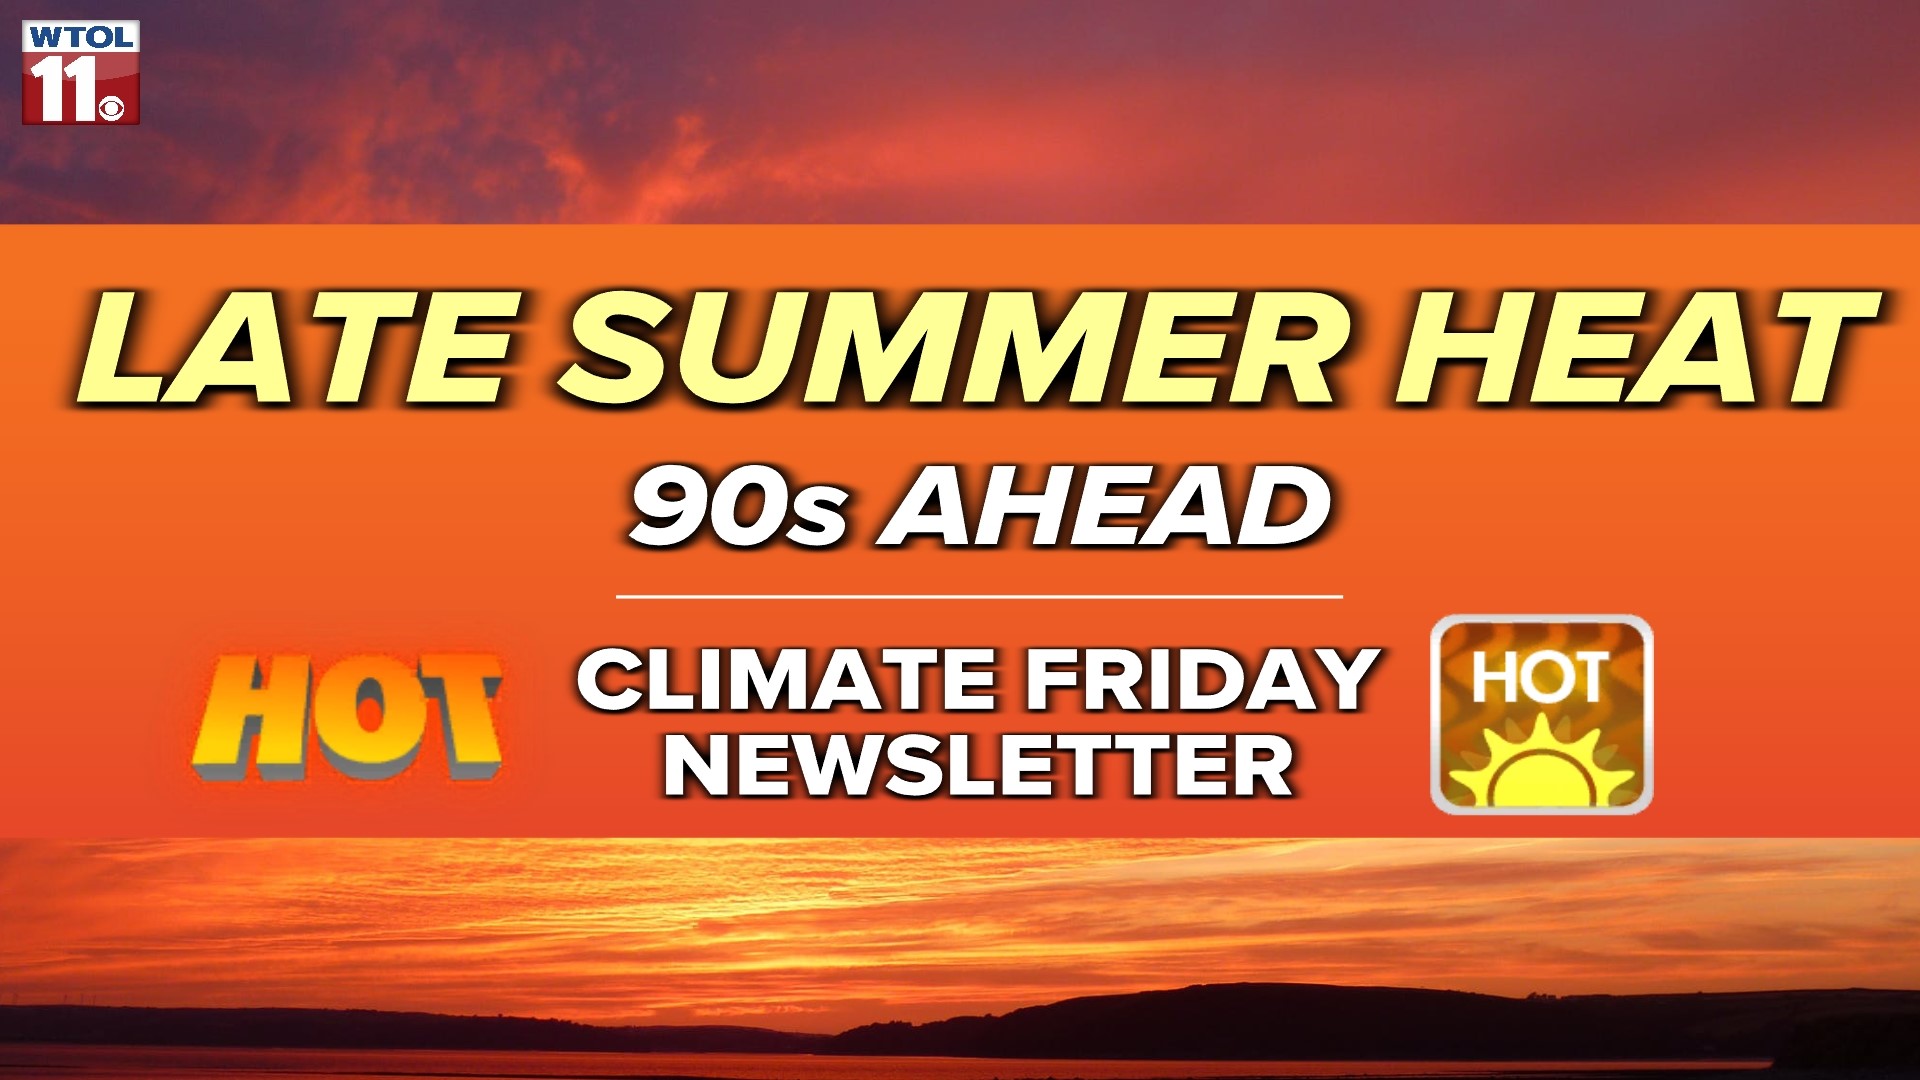 Climate Friday Early September to bring heat wave